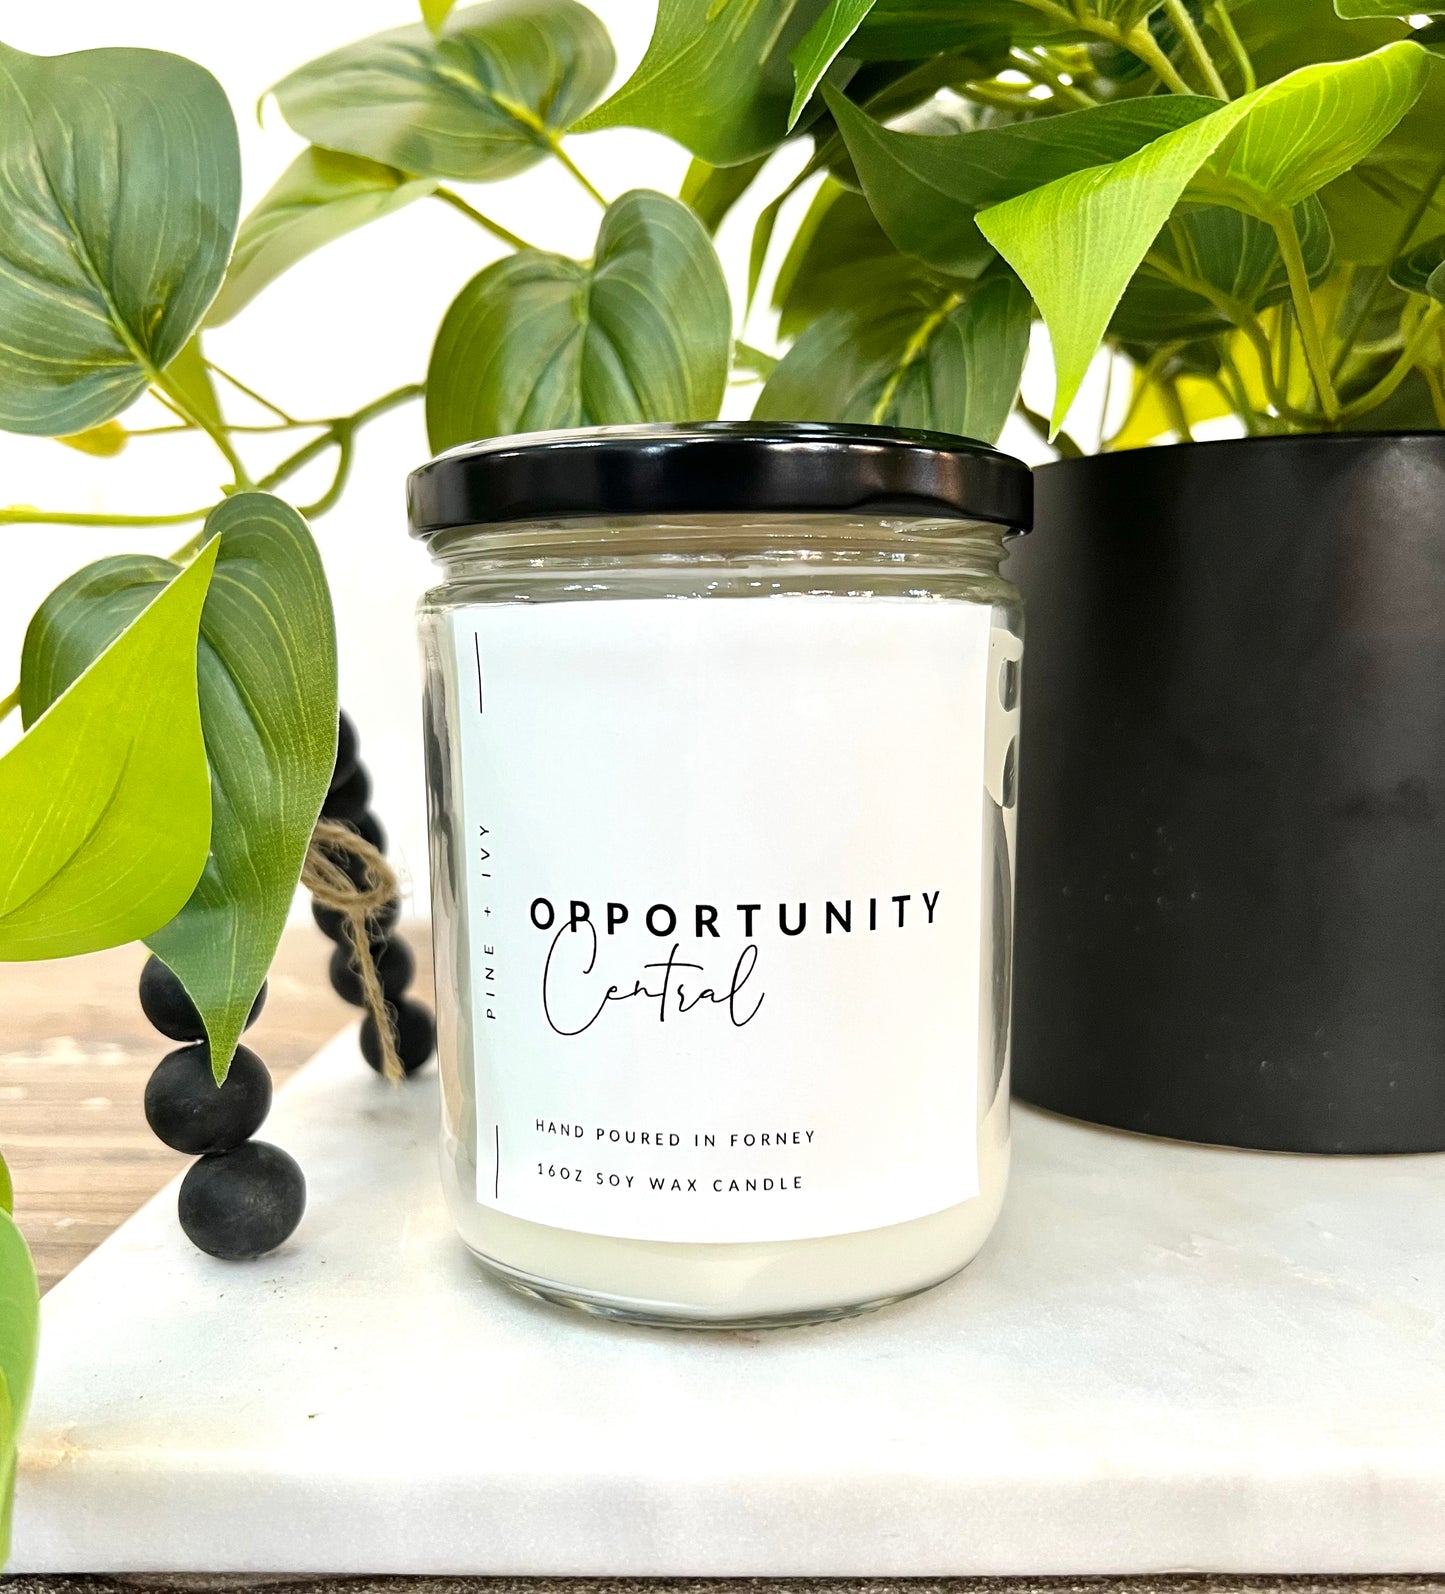 Opportunity Central - 16 oz. Candle